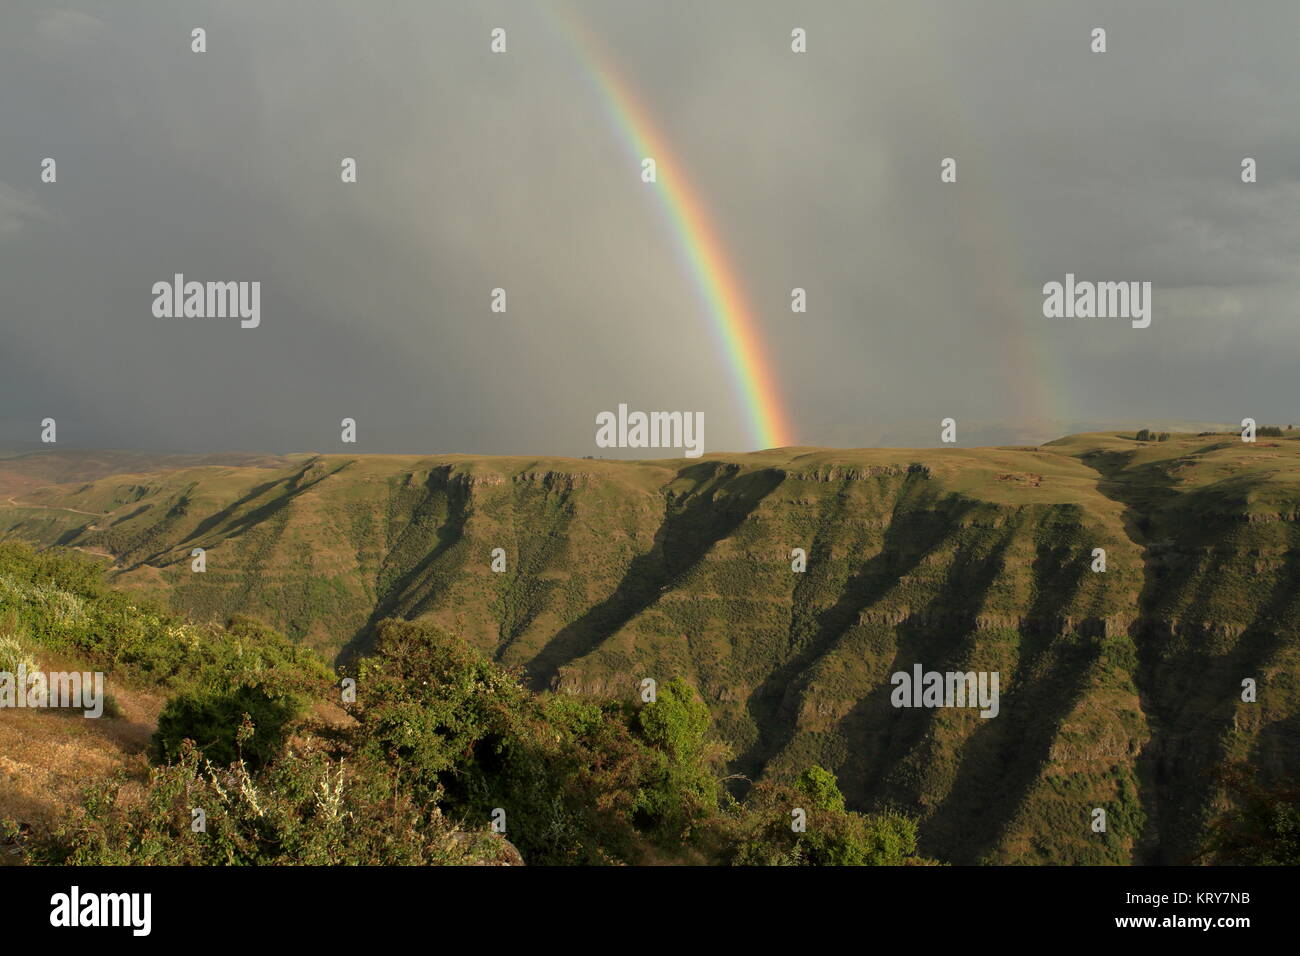 a rainbow over the simien mountains in ethiopia Stock Photo